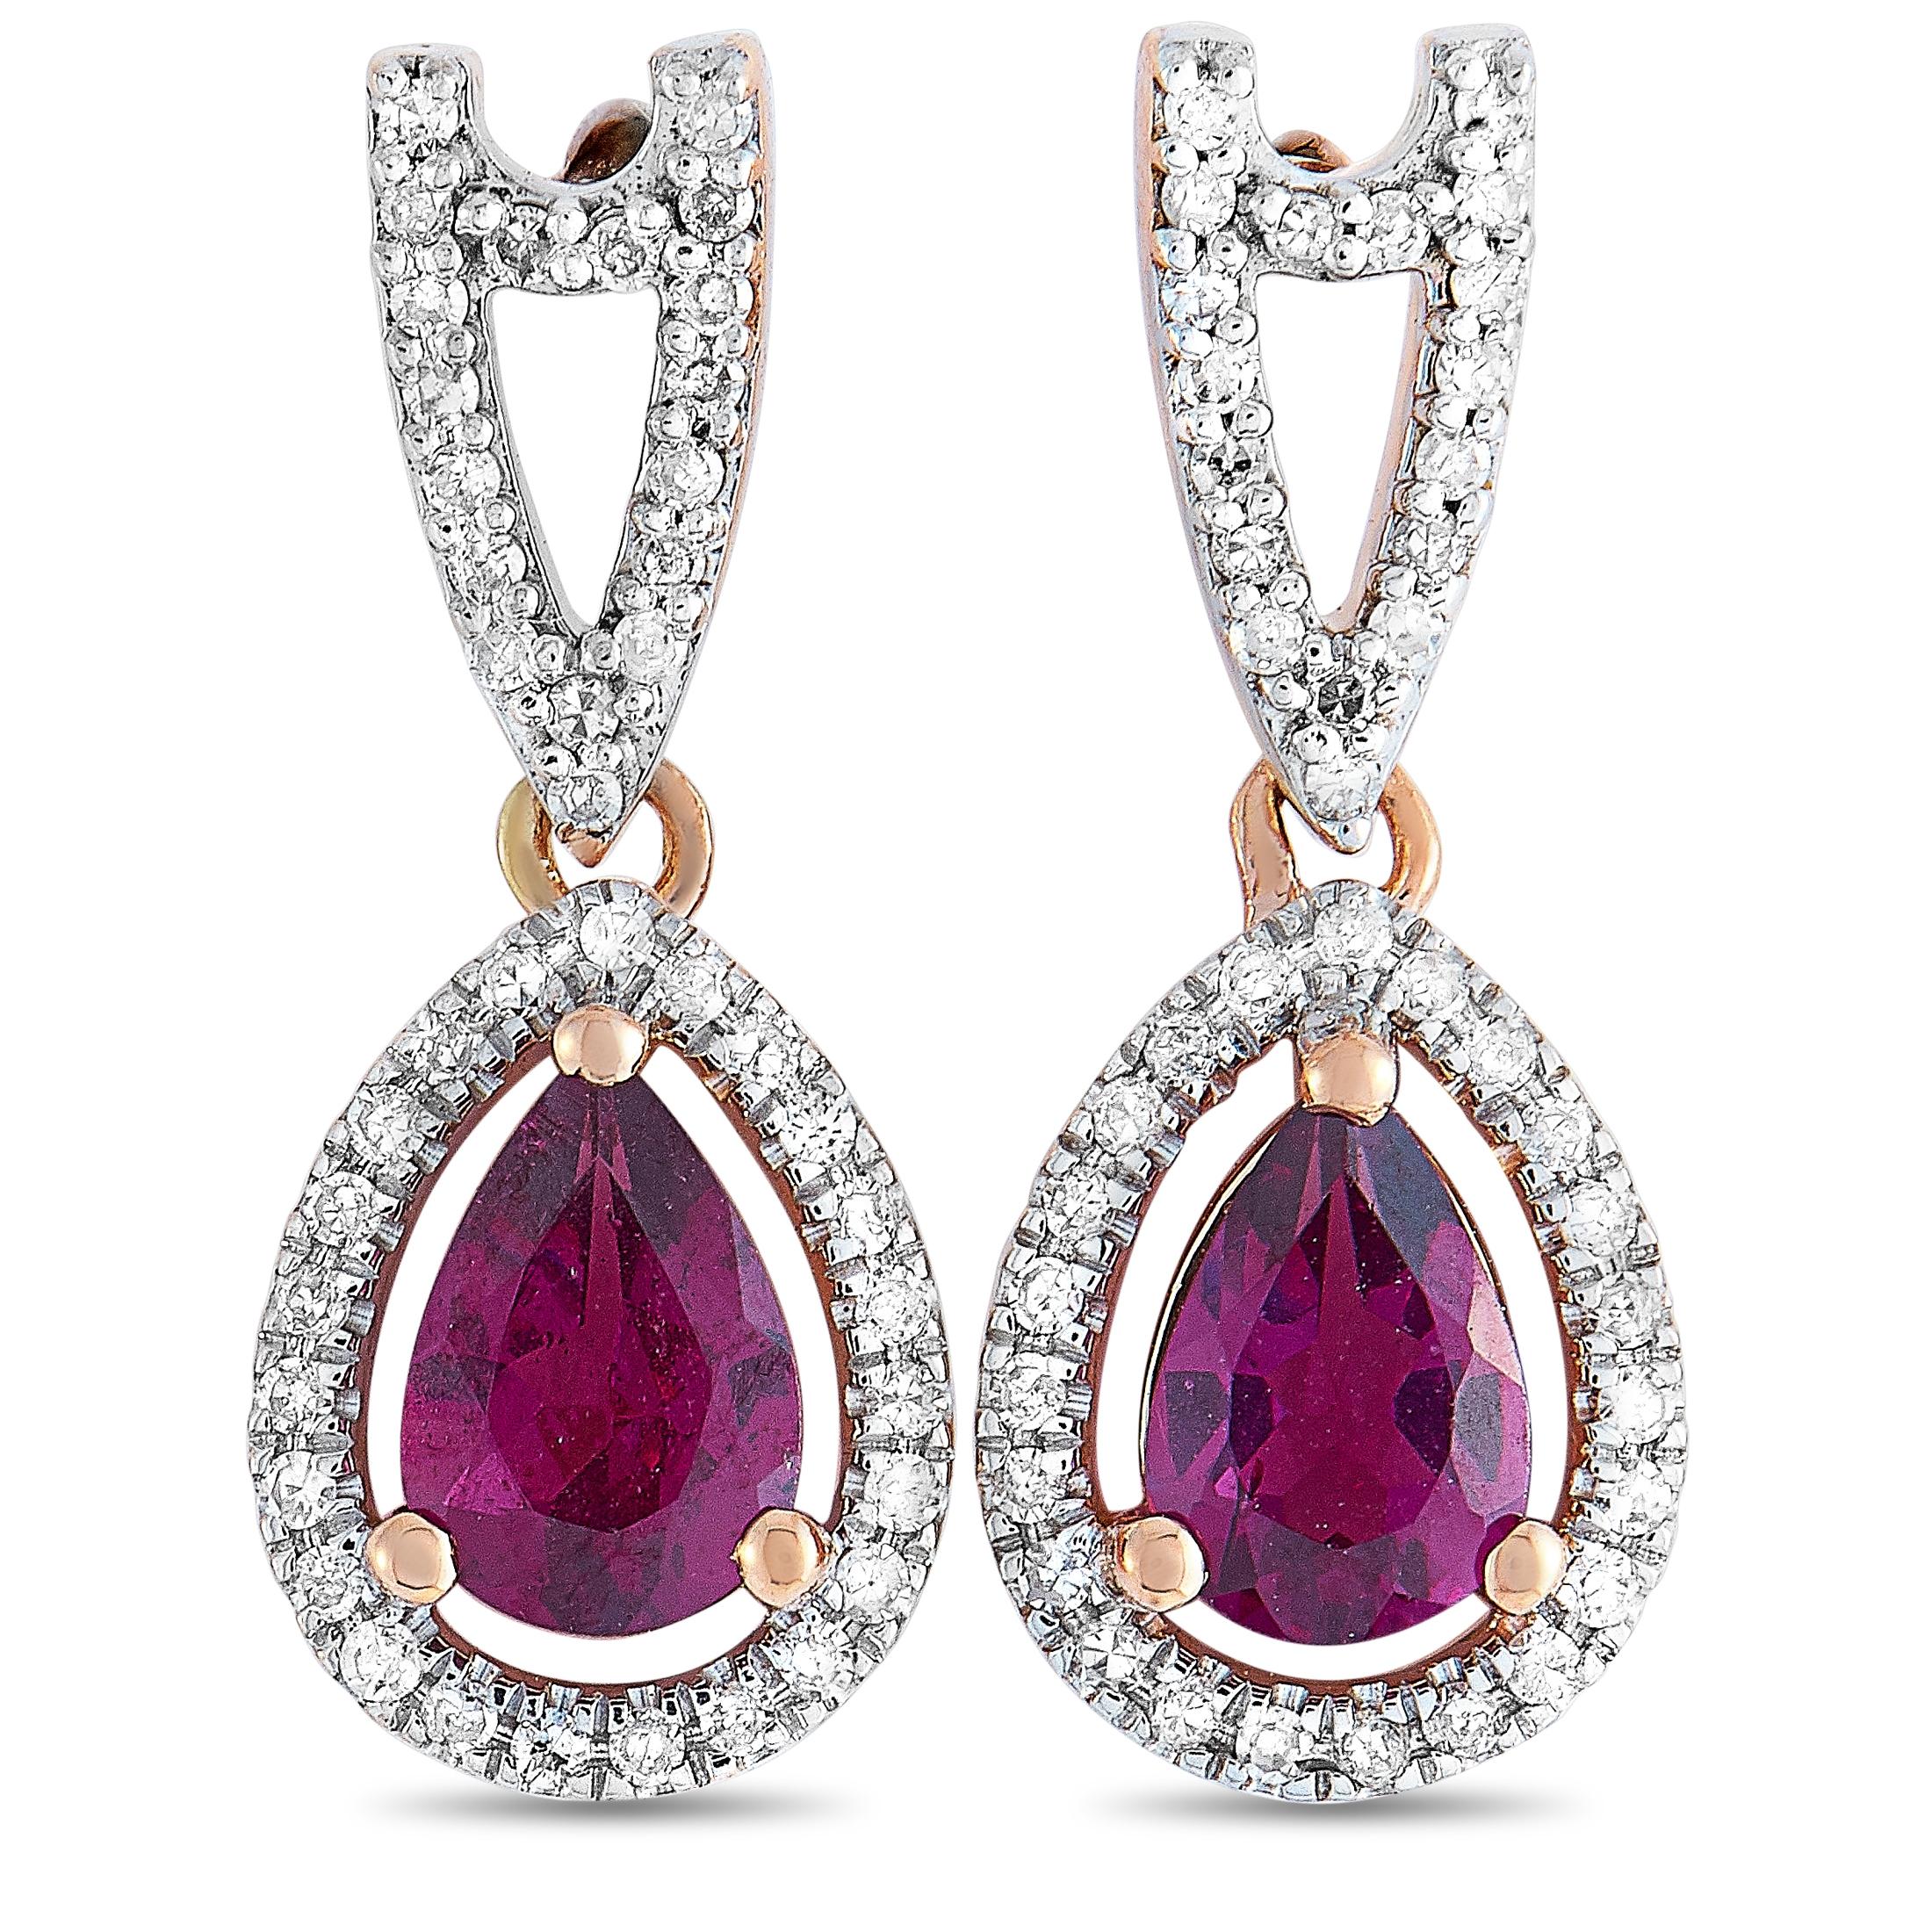 These LB Exclusive earrings are crafted from 14K rose gold and set with two garnets that amount to 0.91 carats and with a total of 0.22 carats of diamonds. The earrings measure 0.75” in length and 0.27” in width, and each of the two weighs 1.15